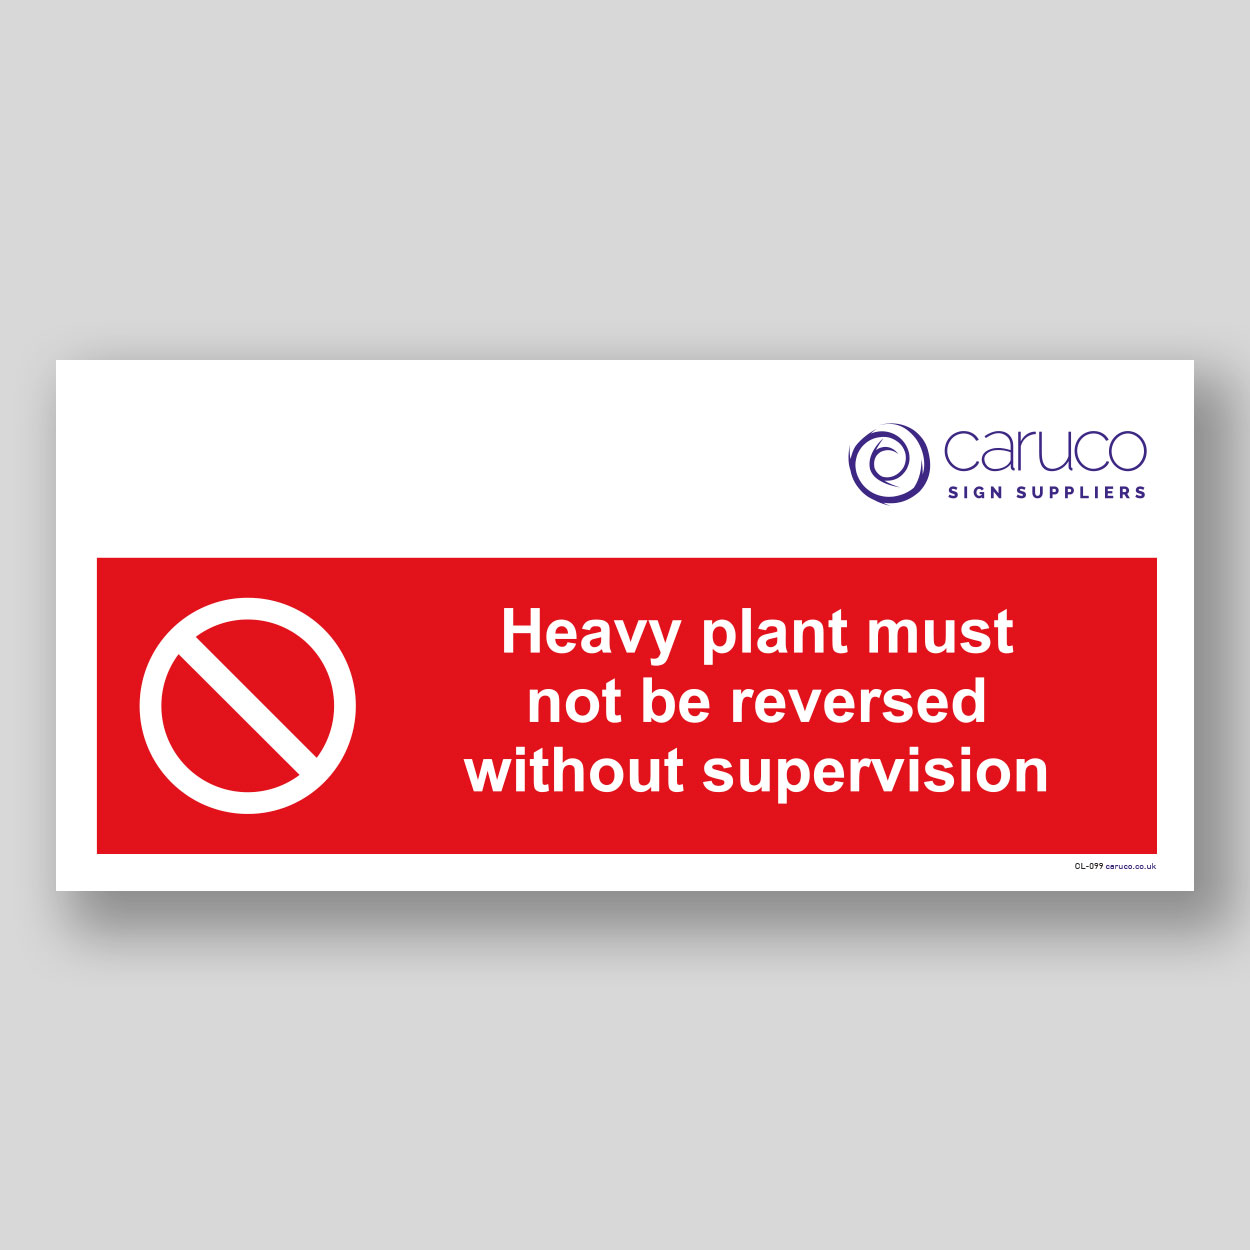 CL-099 Heavy plant must not be reversed